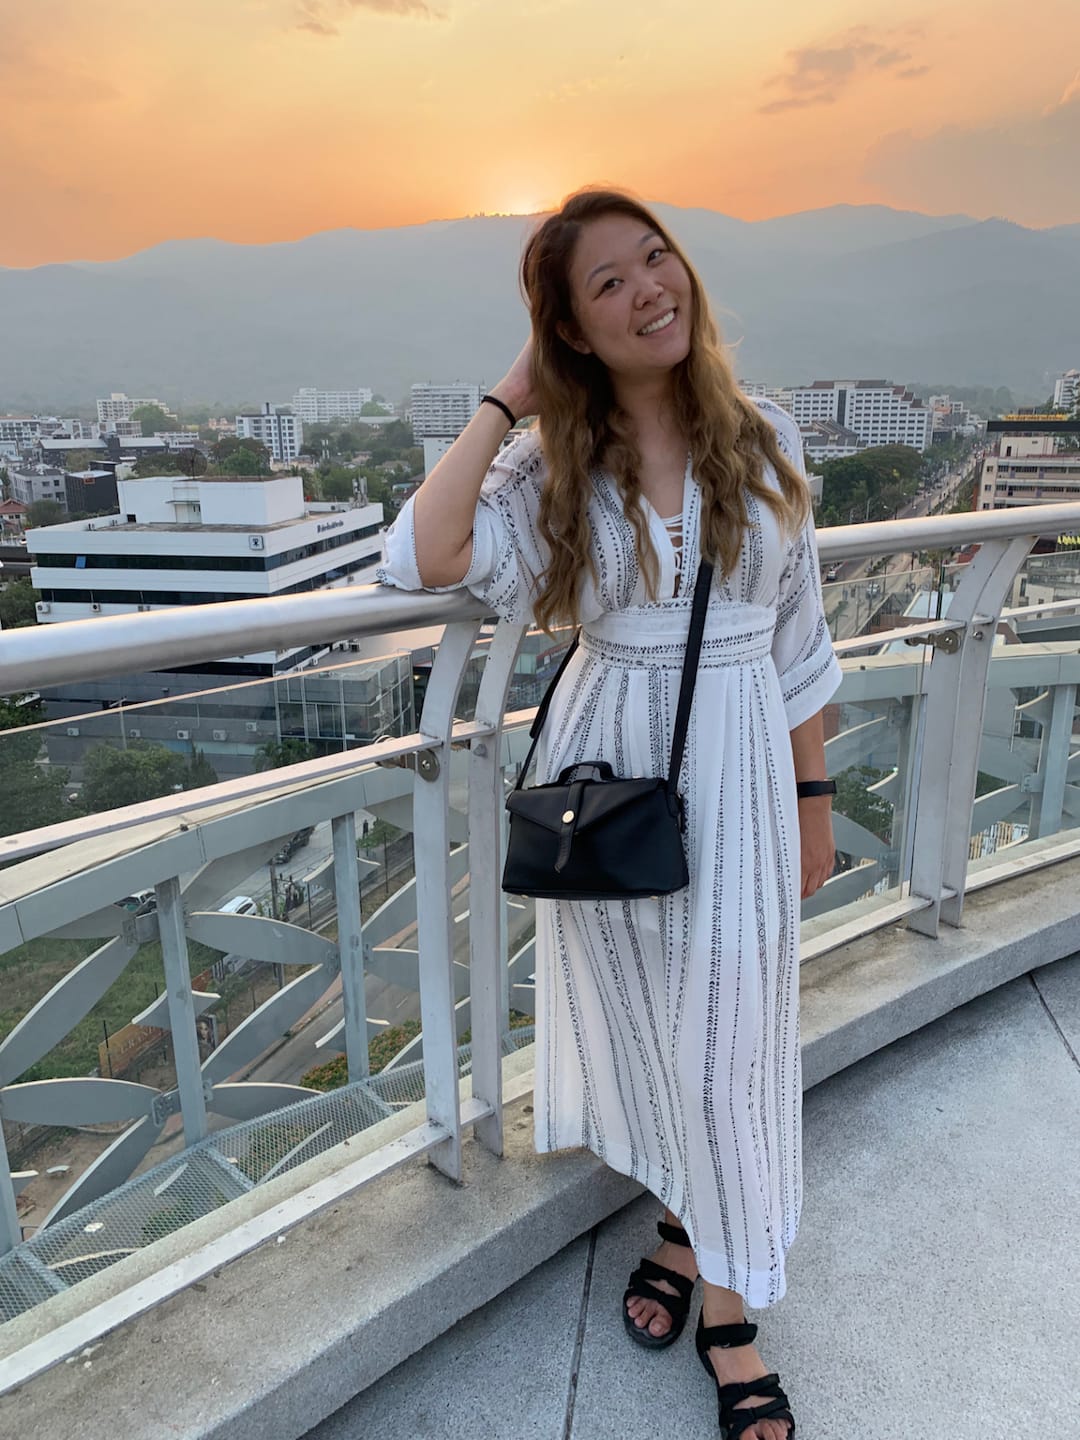 Girl wearing a white dress, smiling with mountains and an orange sunset behind her